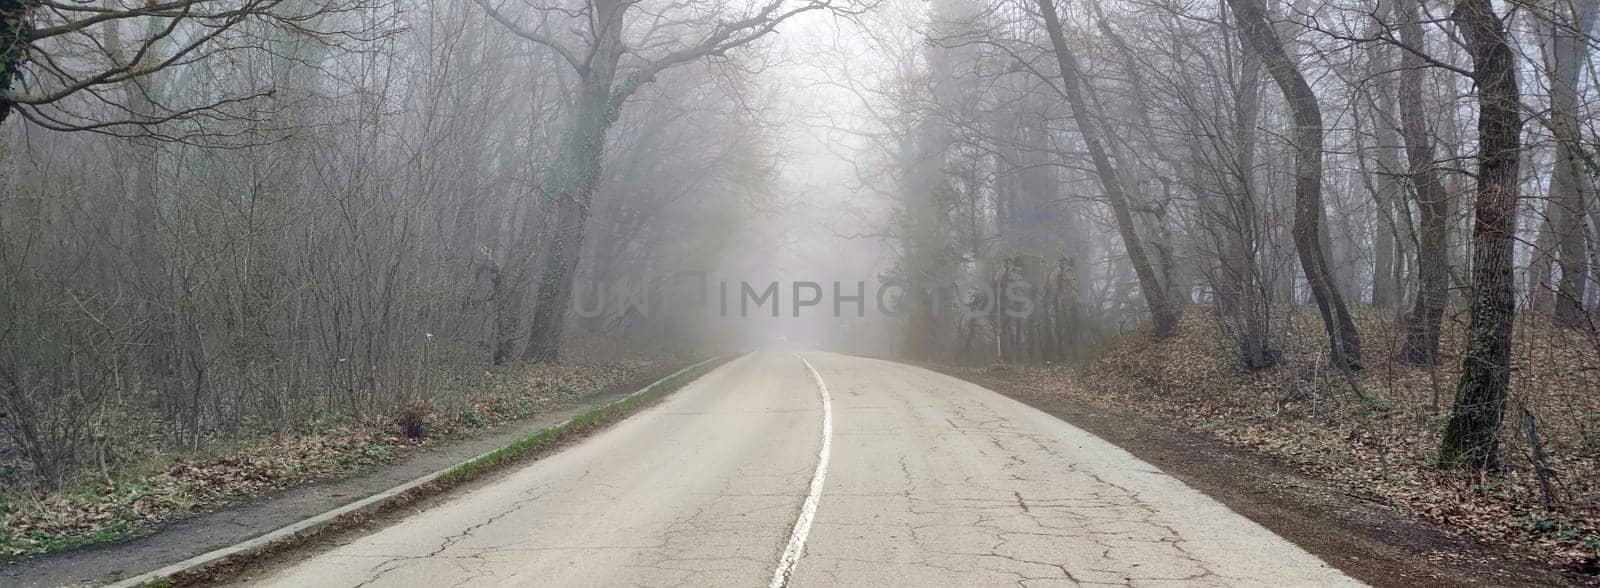 road in the forest in the fog for a horizontal background by Annado